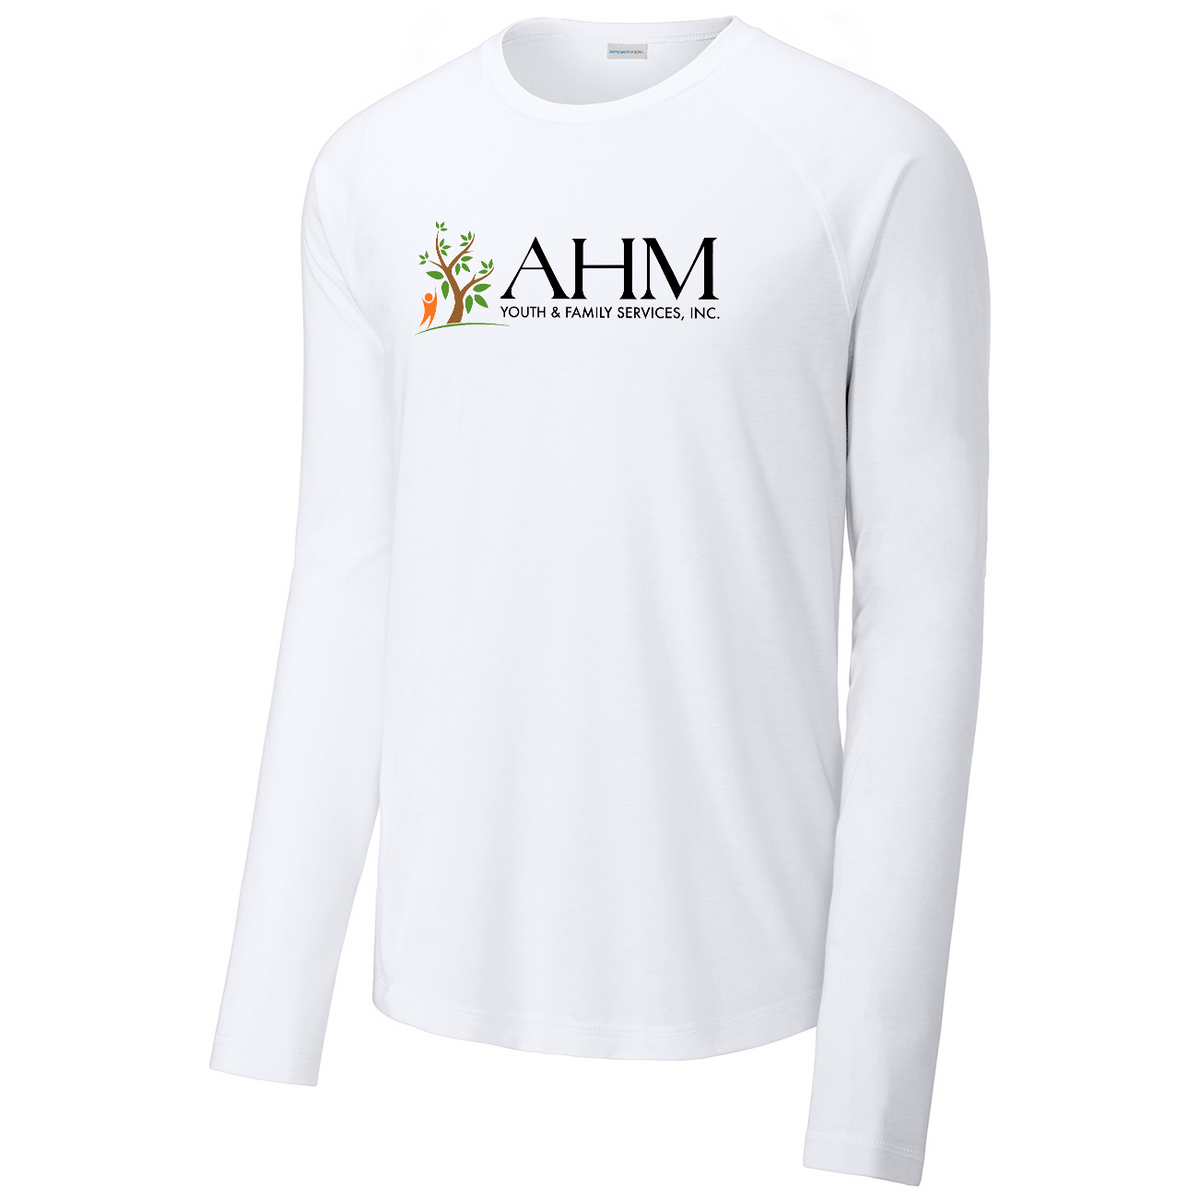 AHM Youth & Family Services Long Sleeve Raglan CottonTouch